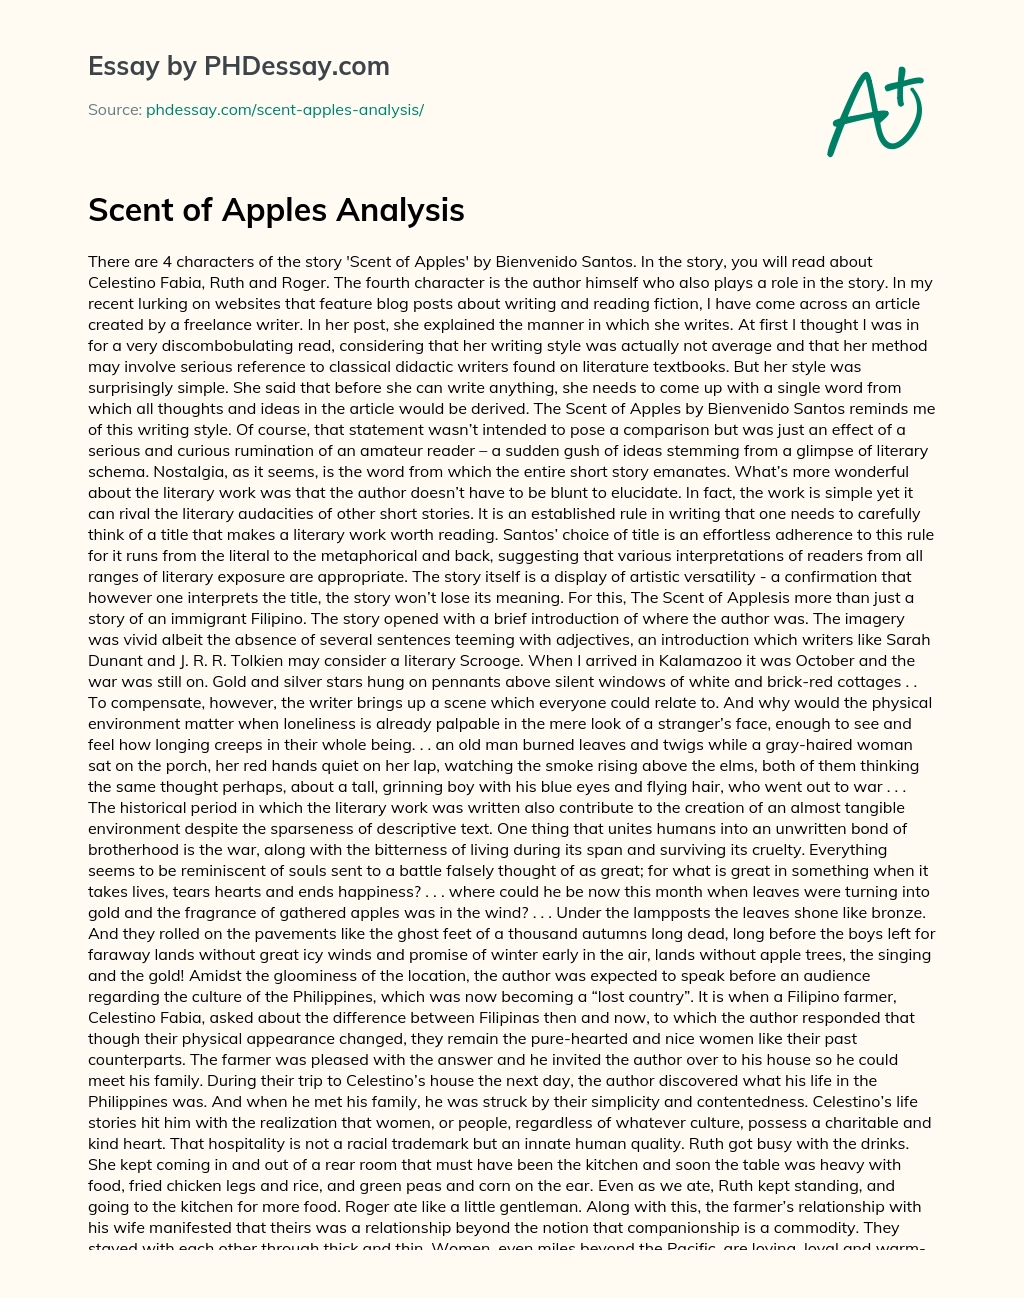 Scent of Apples Analysis essay